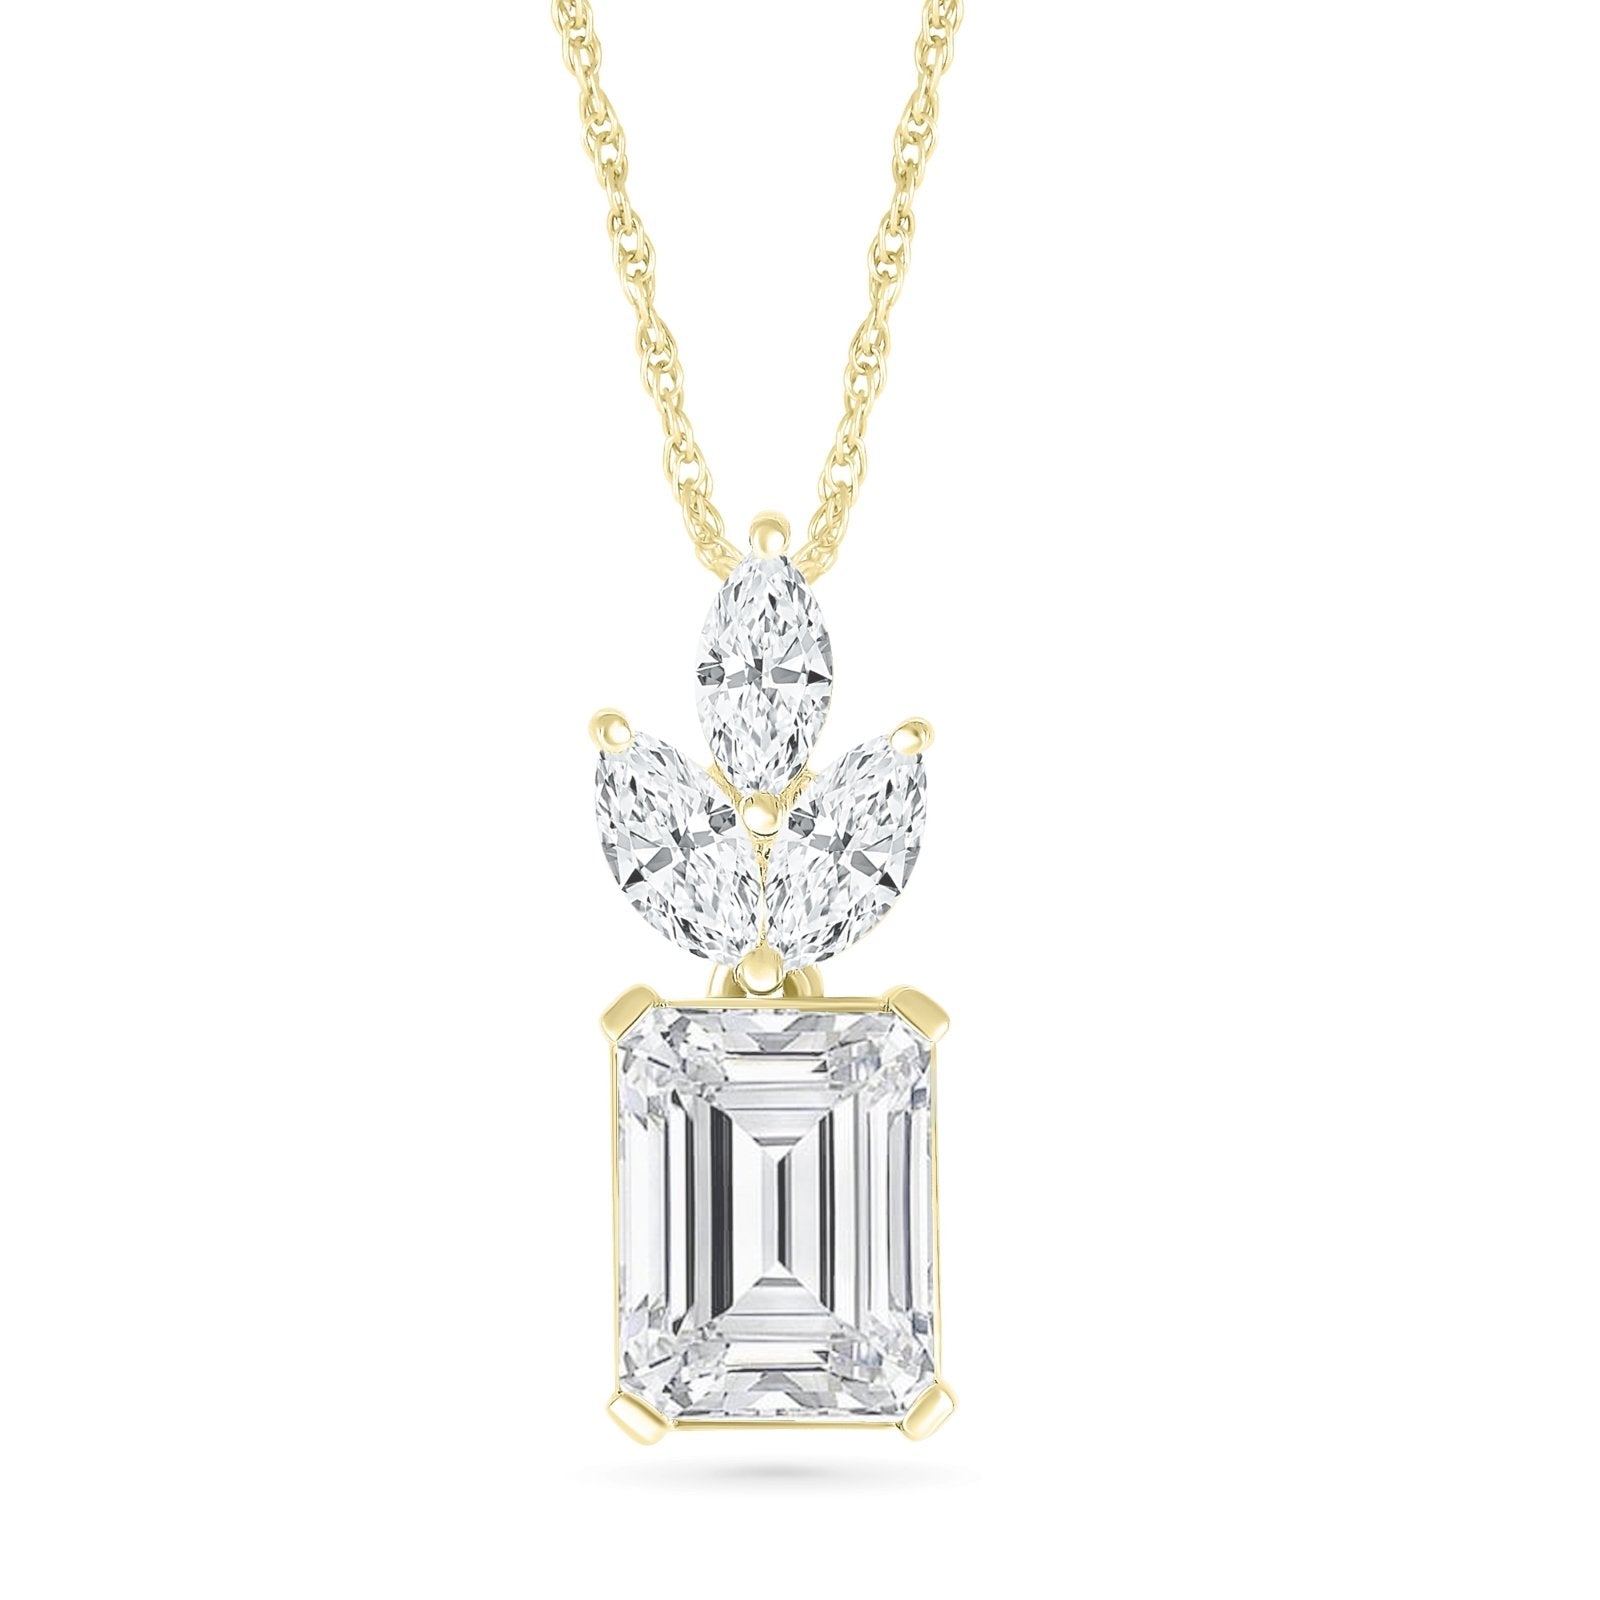 White Sapphire Pendant with Crown Necklaces Estella Collection 32728 Emerald Made to Order White Sapphire #tag4# #tag5# #tag6# #tag7# #tag8# #tag9# #tag10#